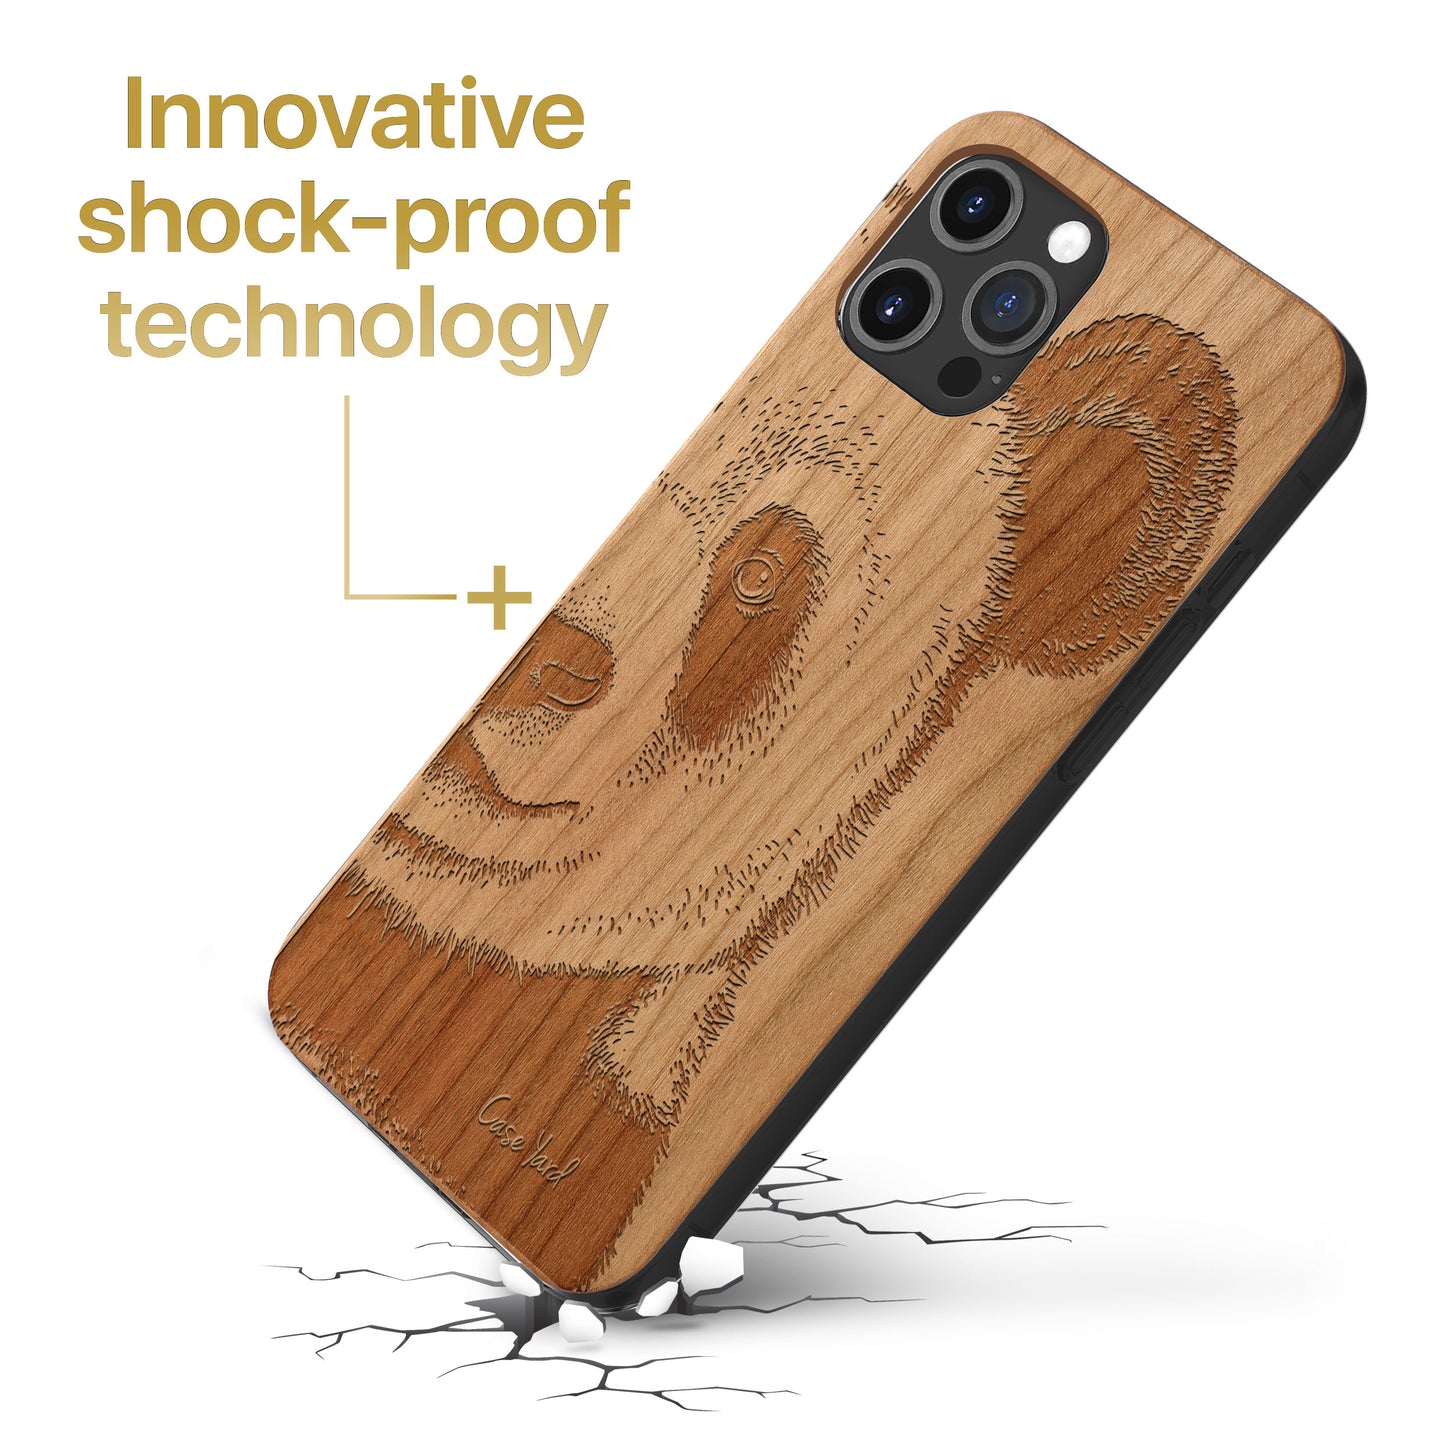 Wooden Cell Phone Case Cover, Laser Engraved case for iPhone & Samsung phone Panda Face Wood Design